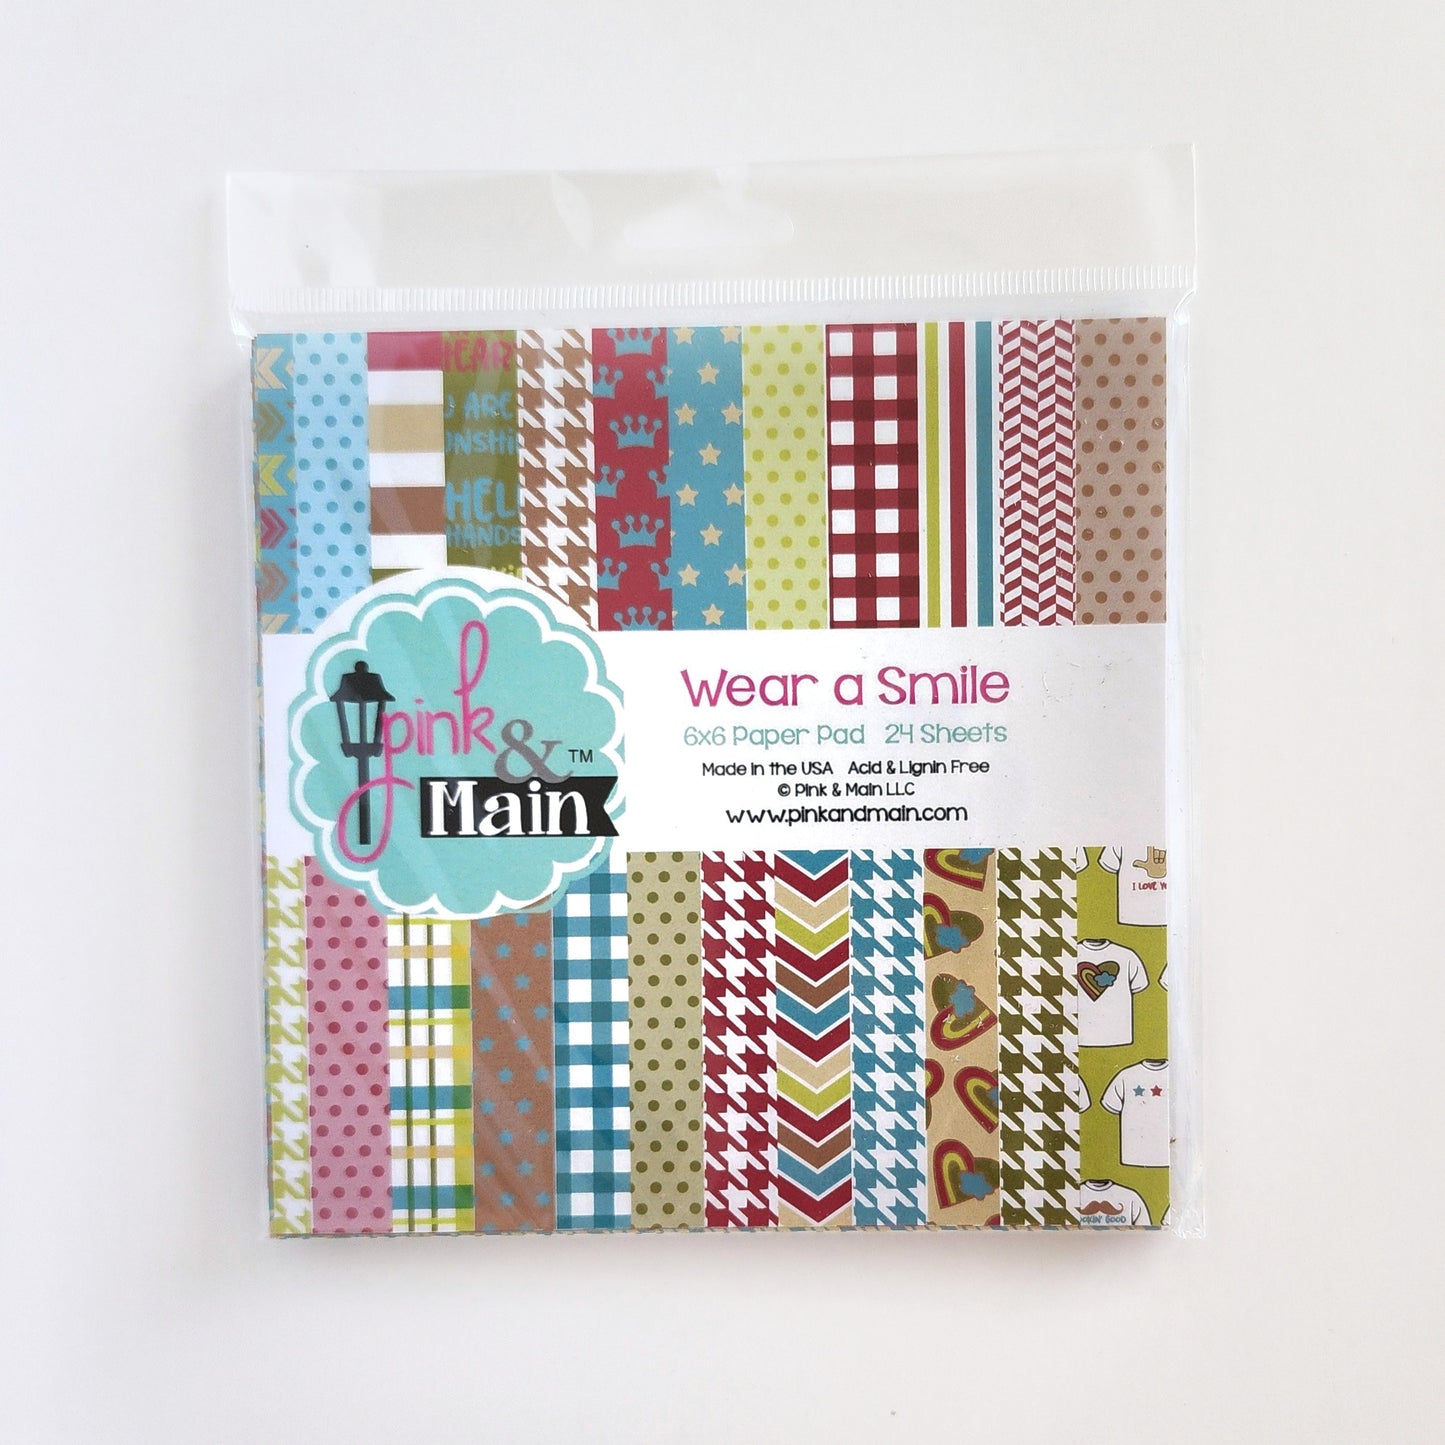 Wear A Smile 6x6 Paper Pack